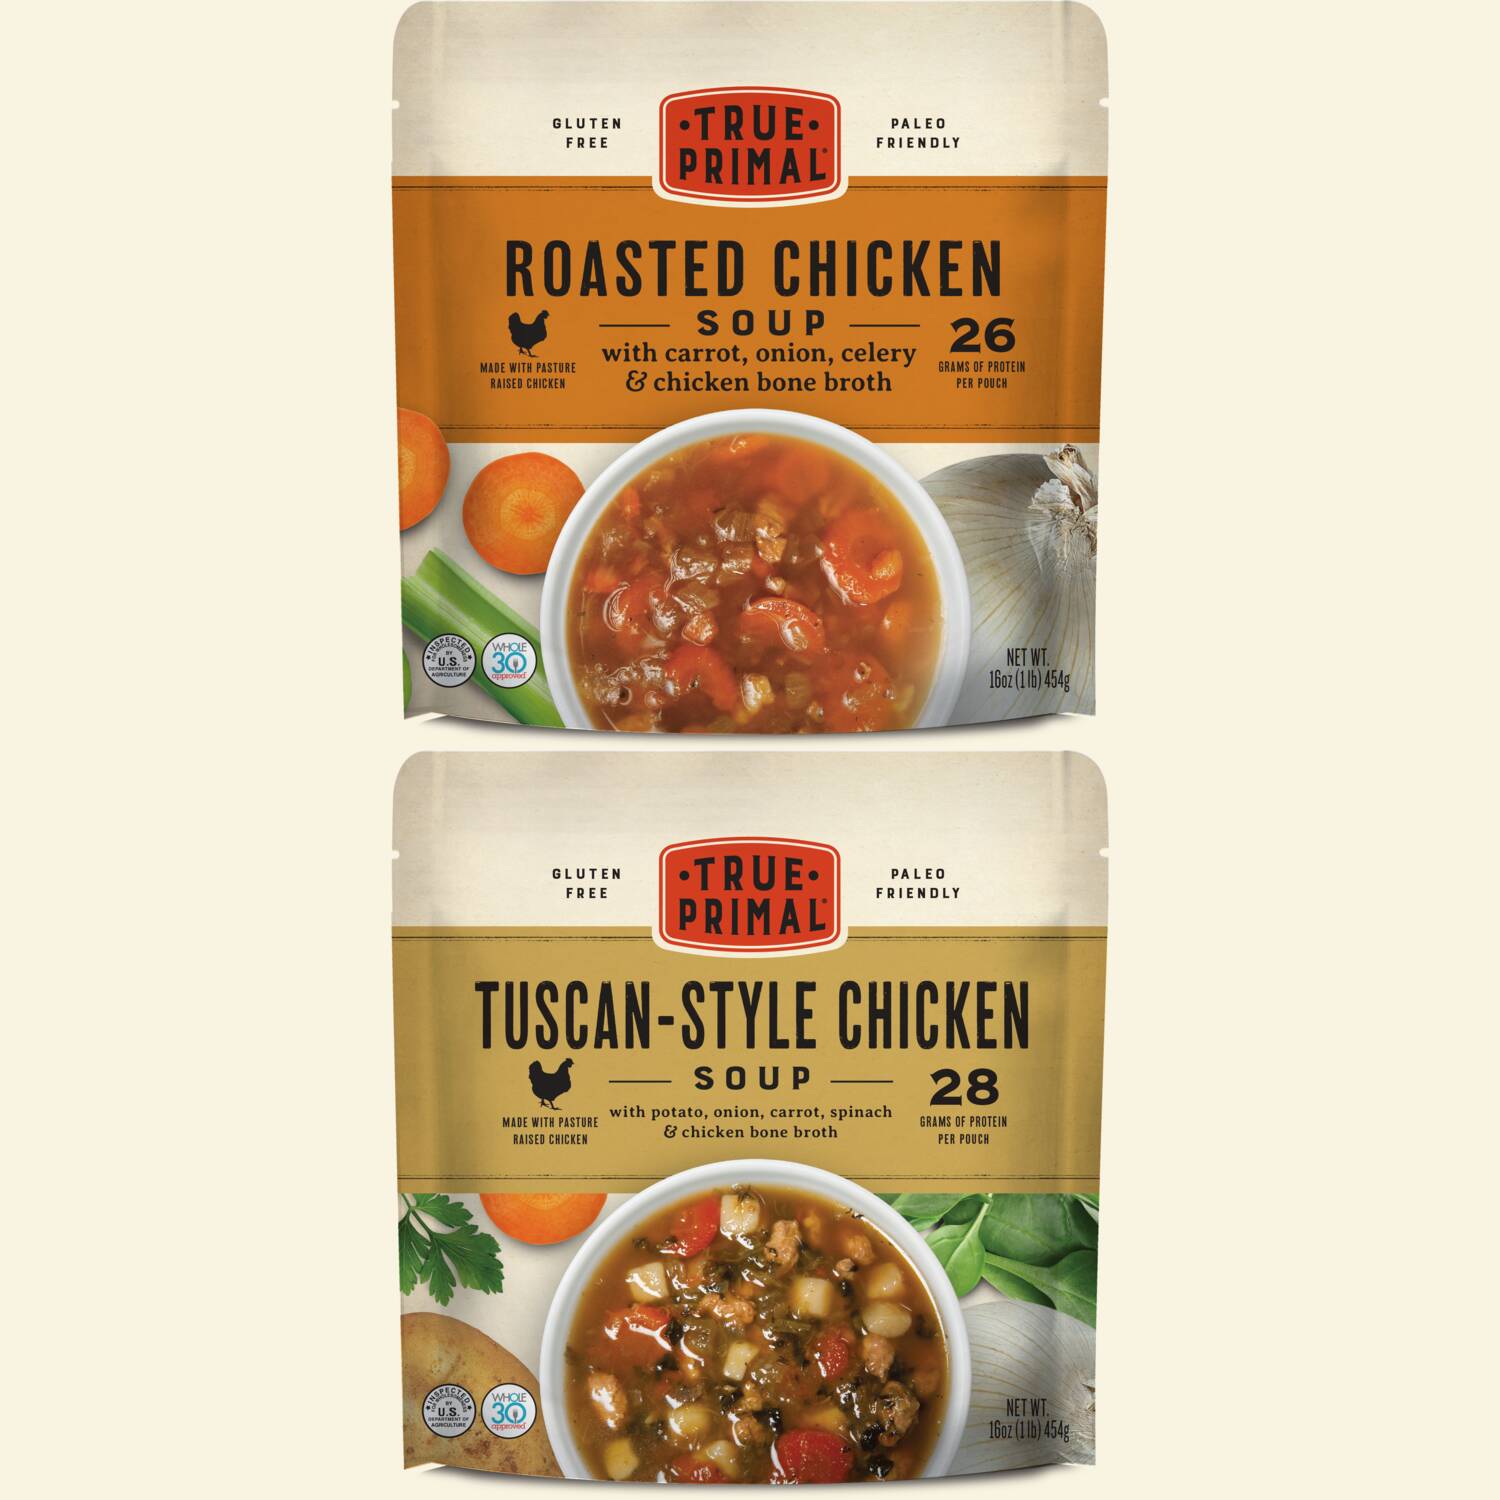 Roasted Chicken Soup, Tuscan-Style Chicken Soup